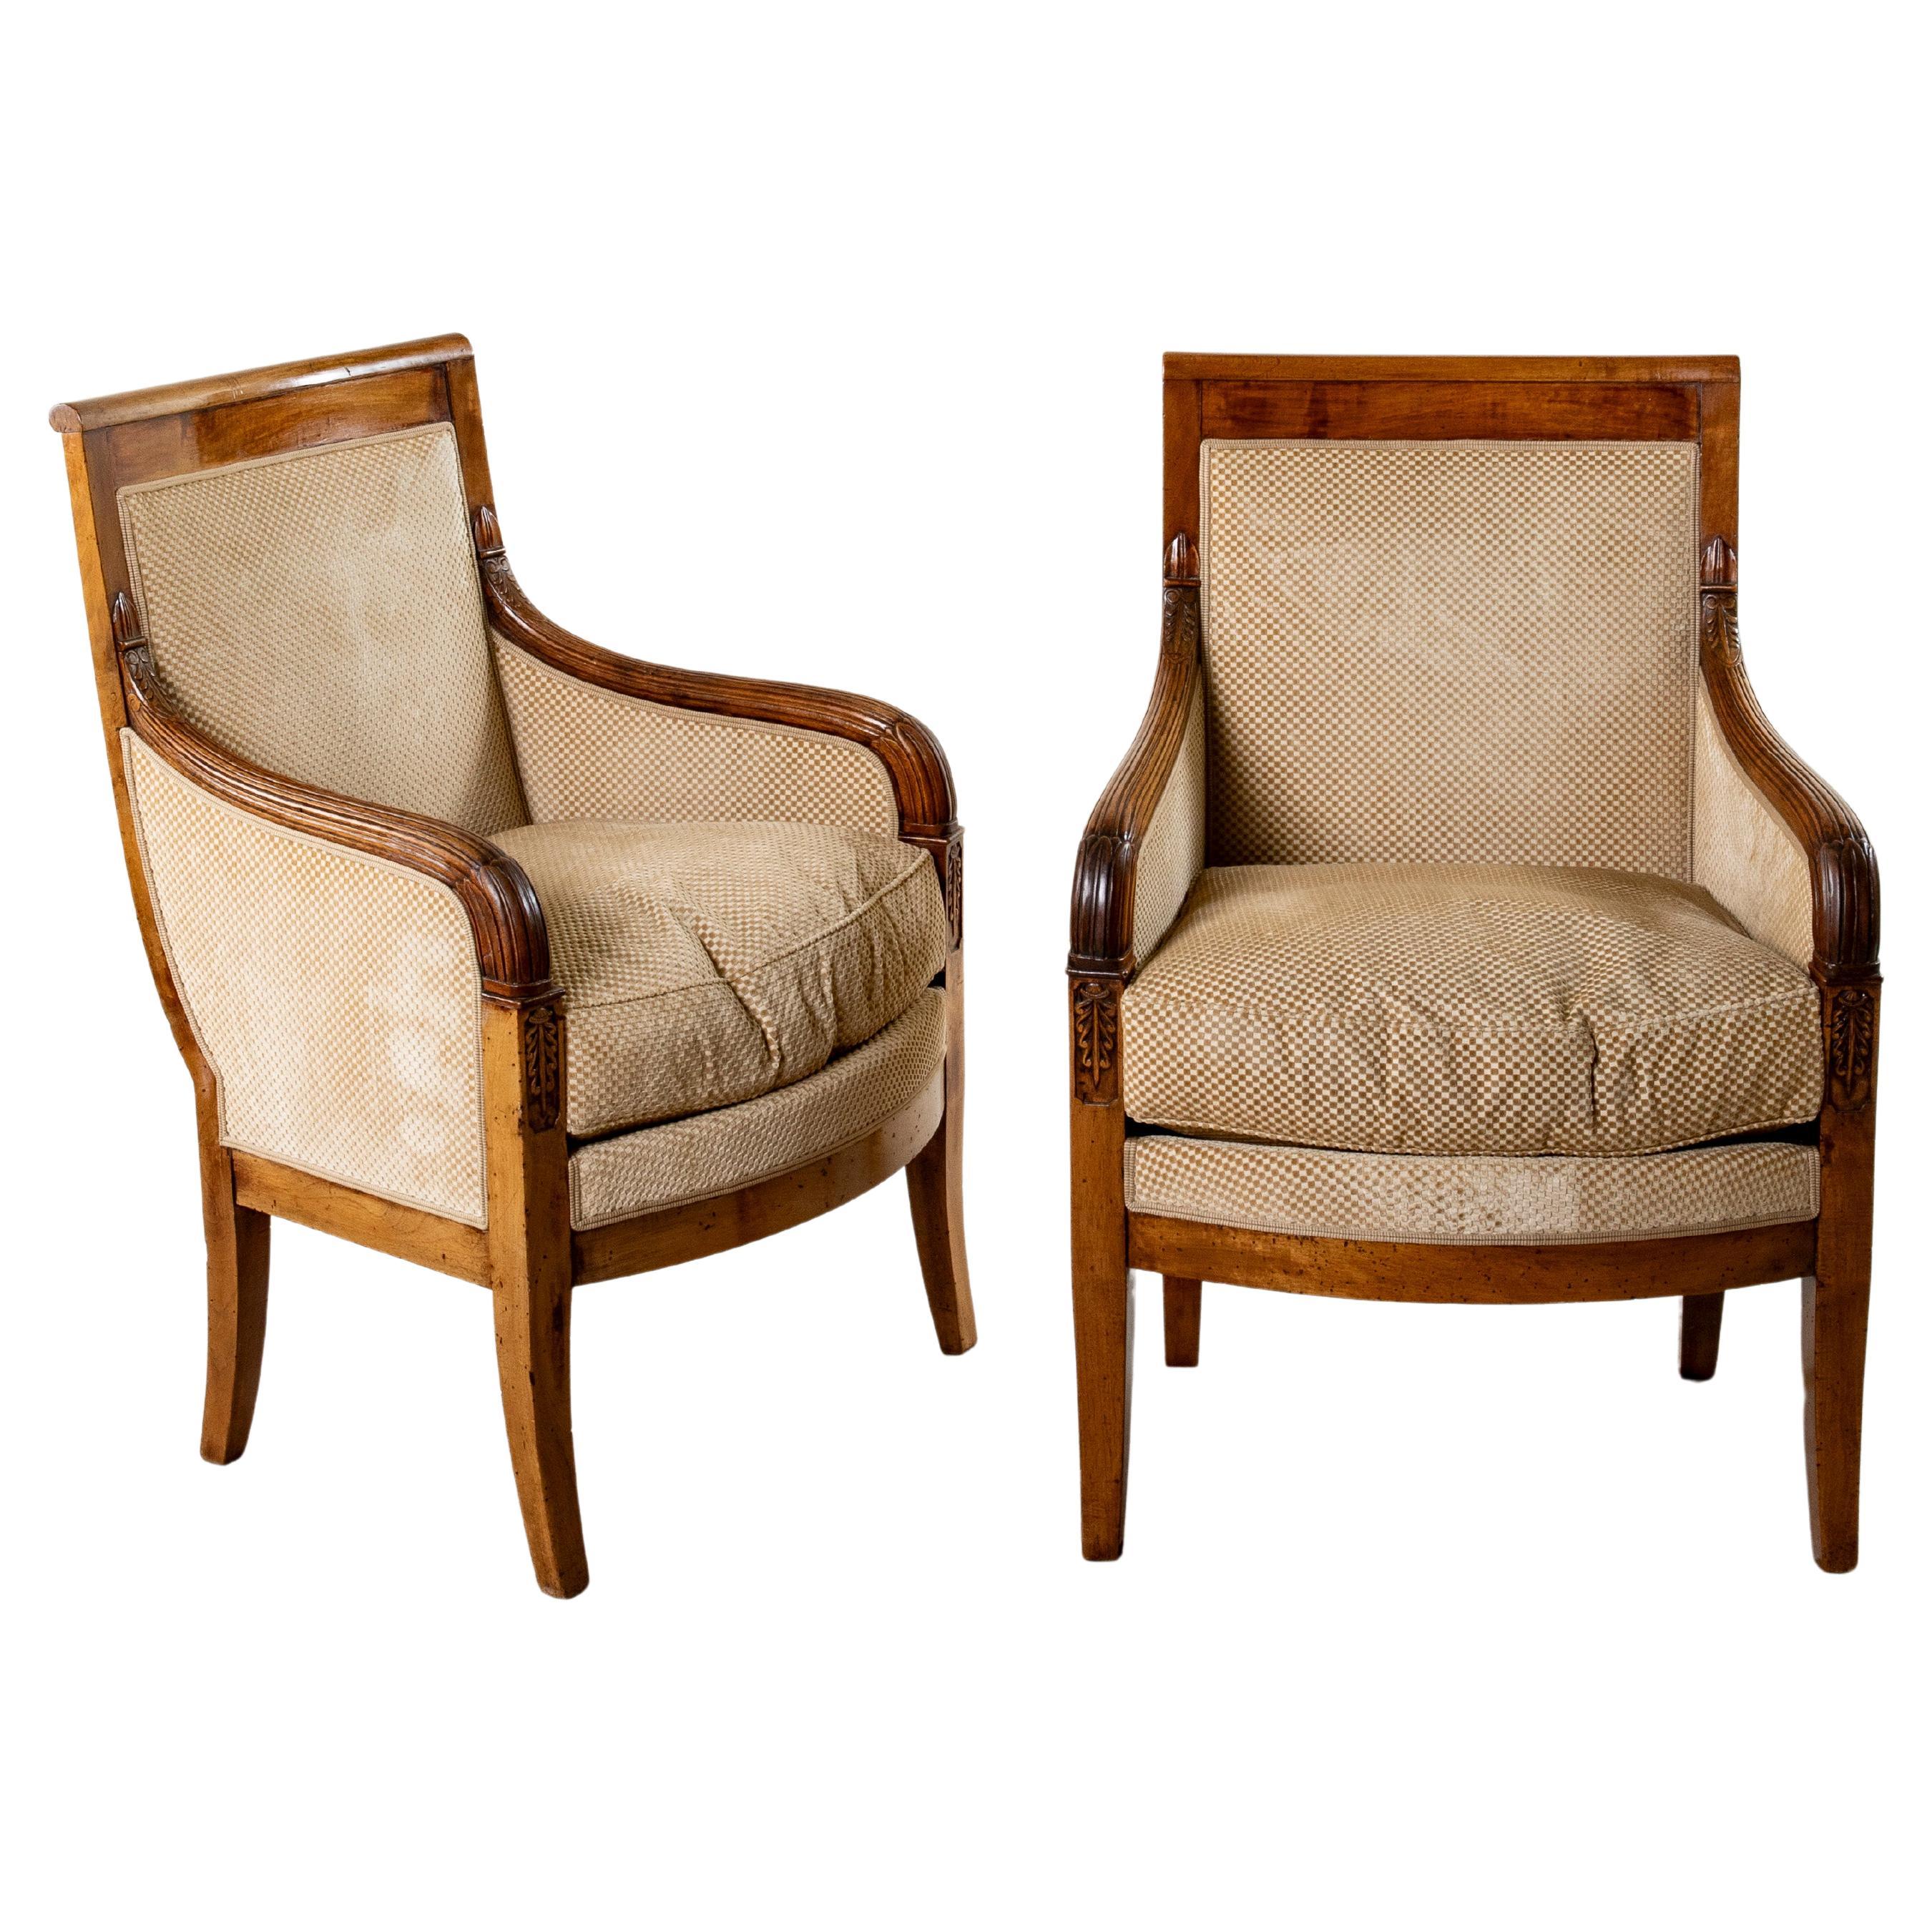 Pair of 19th Century French Empire Period Hand Carved Walnut Bergeres, Armchairs For Sale